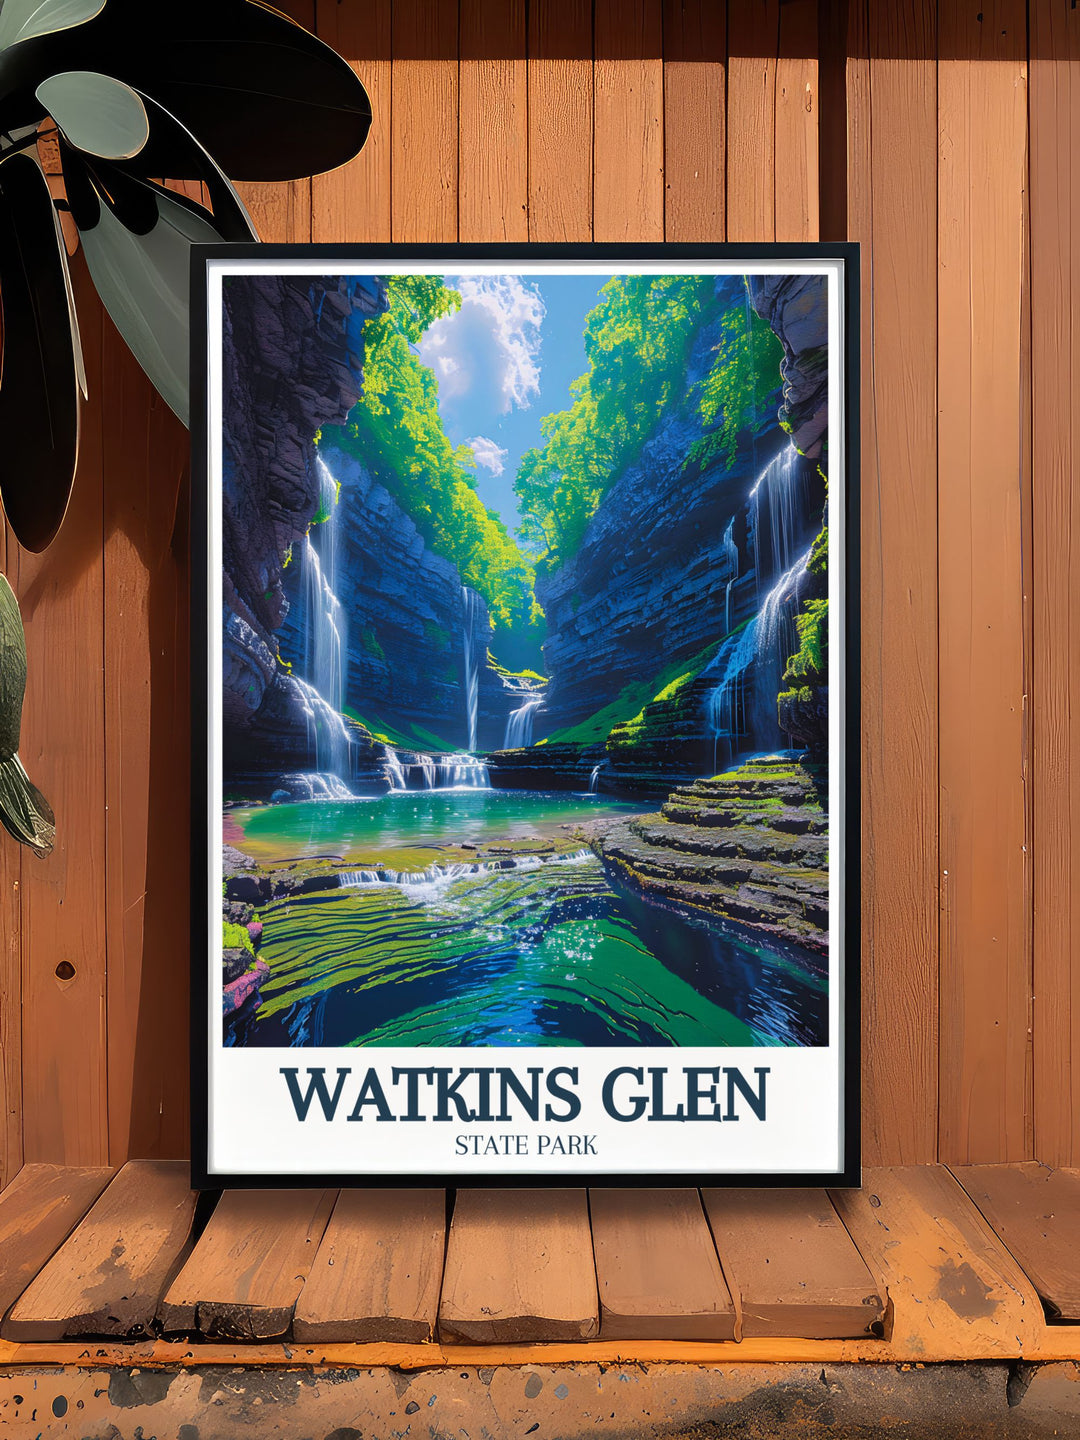 This gallery wall art features captivating views of Watkins Glen State Park, showcasing its lush greenery and scenic gorges. A stunning piece for creating a focal point that celebrates New Yorks natural parks, it adds sophistication and tranquility to any gallery wall, blending history and nature beautifully.